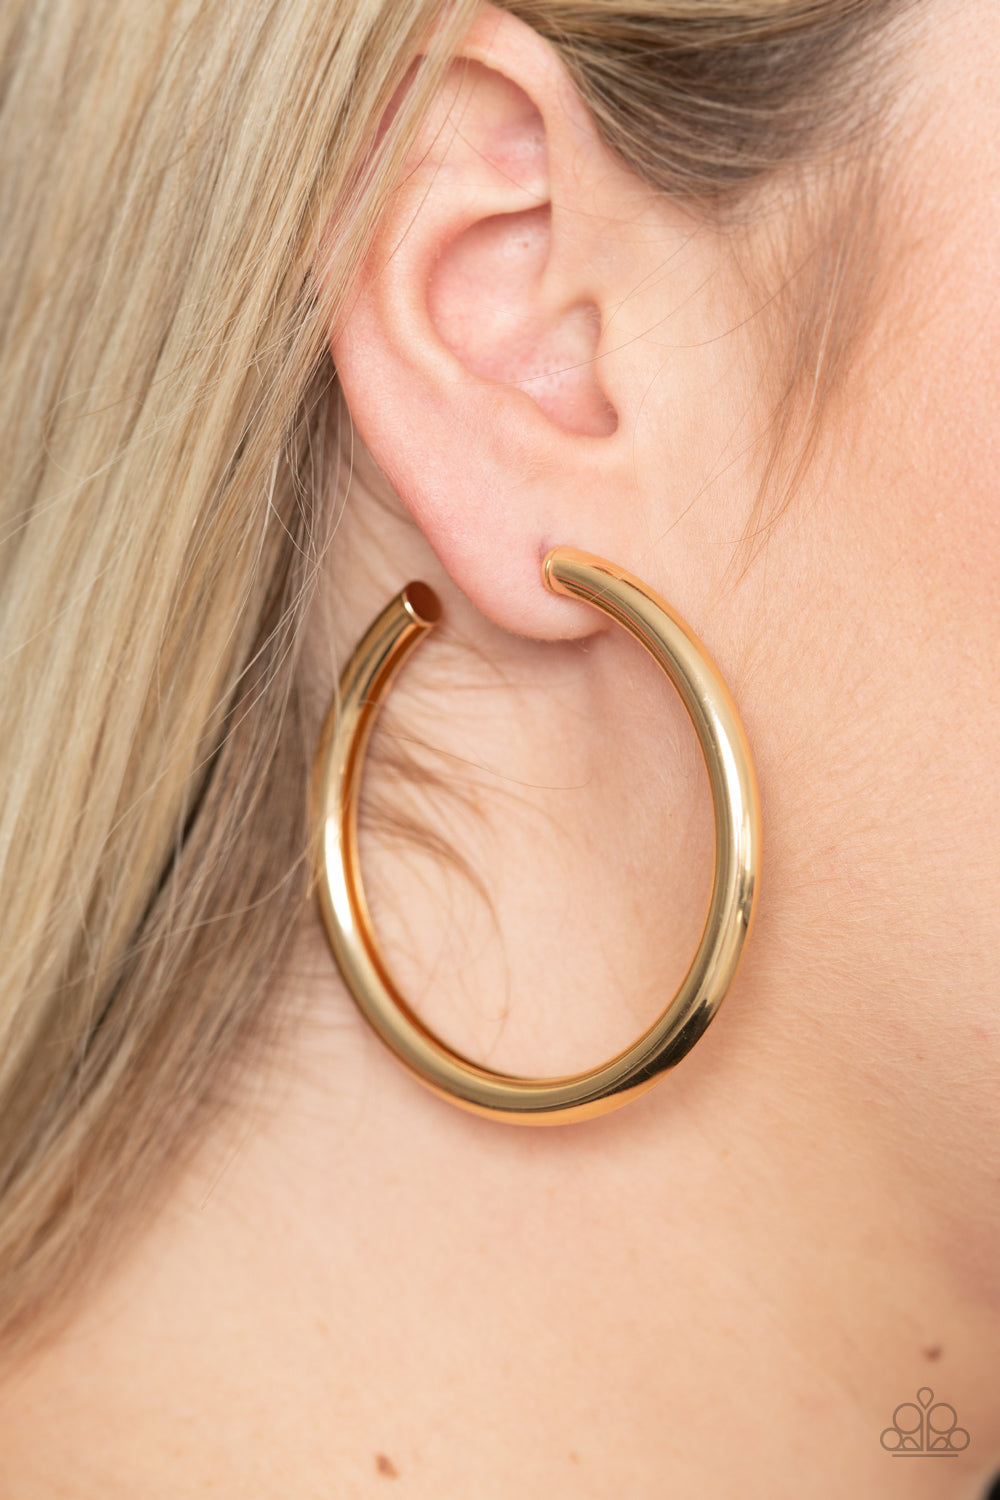 A thick gold bar delicately curls into a glistening oversized hoop for a retro look. Earring attaches to a standard post fitting. Hoop measures approximately 2 1/4